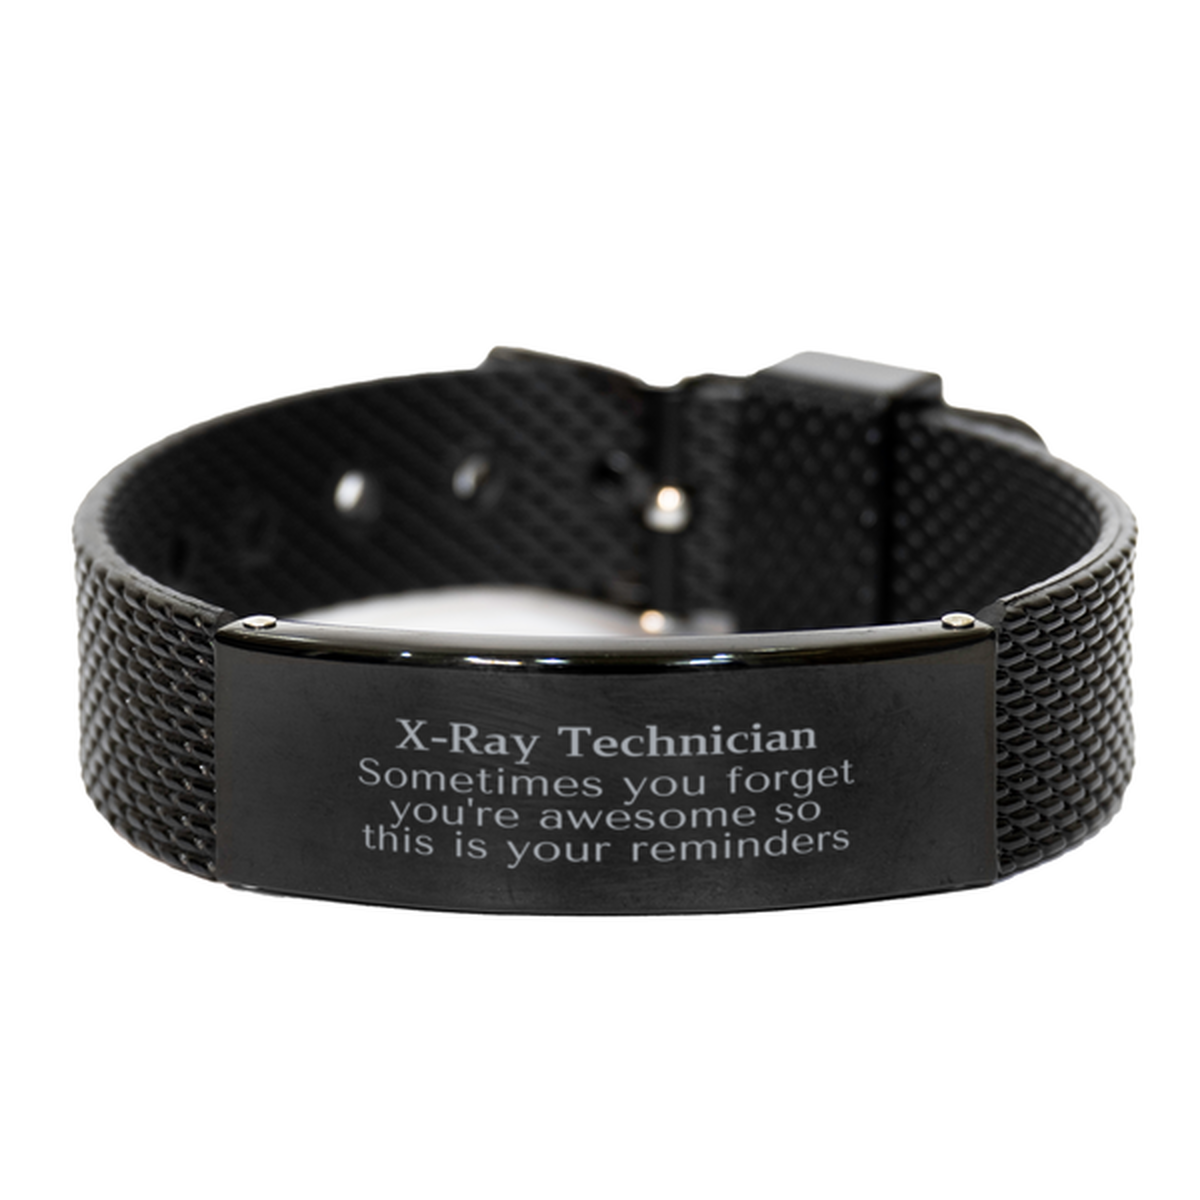 Sentimental X-Ray Technician Black Shark Mesh Bracelet, X-Ray Technician Sometimes you forget you're awesome so this is your reminders, Graduation Christmas Birthday Gifts for X-Ray Technician, Men, Women, Coworkers